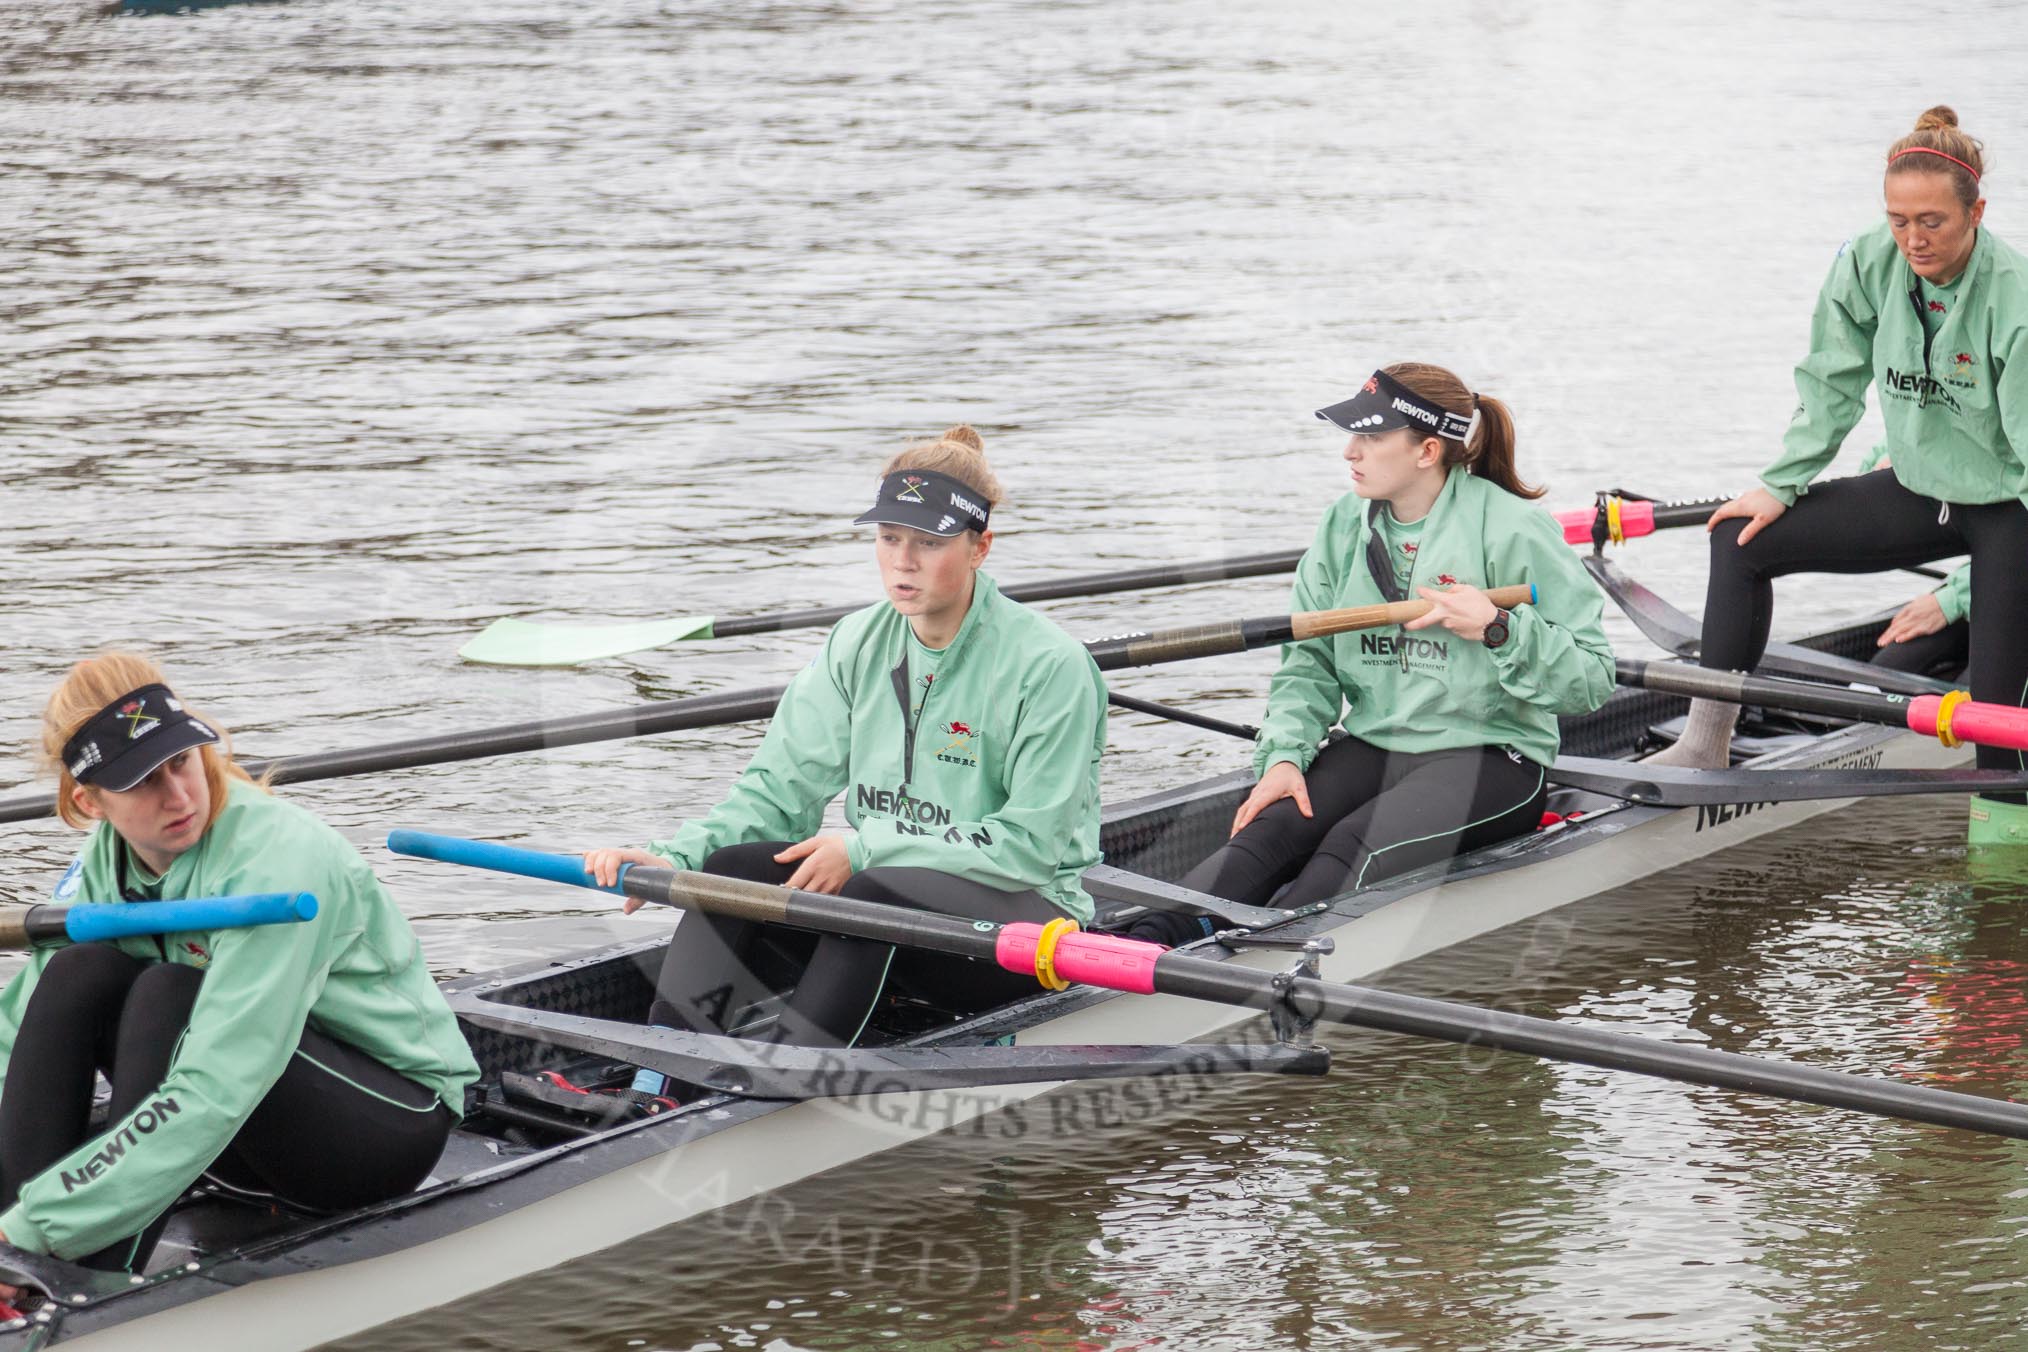 The Boat Race season 2016 - Women's Boat Race Trial Eights (CUWBC, Cambridge): Lucy Pike (5), Alice Jackson (4), Rachel Elwood (3), and, standing, Evelyn Boettcher, 2 seat in "Tideway".
River Thames between Putney Bridge and Mortlake,
London SW15,

United Kingdom,
on 10 December 2015 at 10:19, image #23